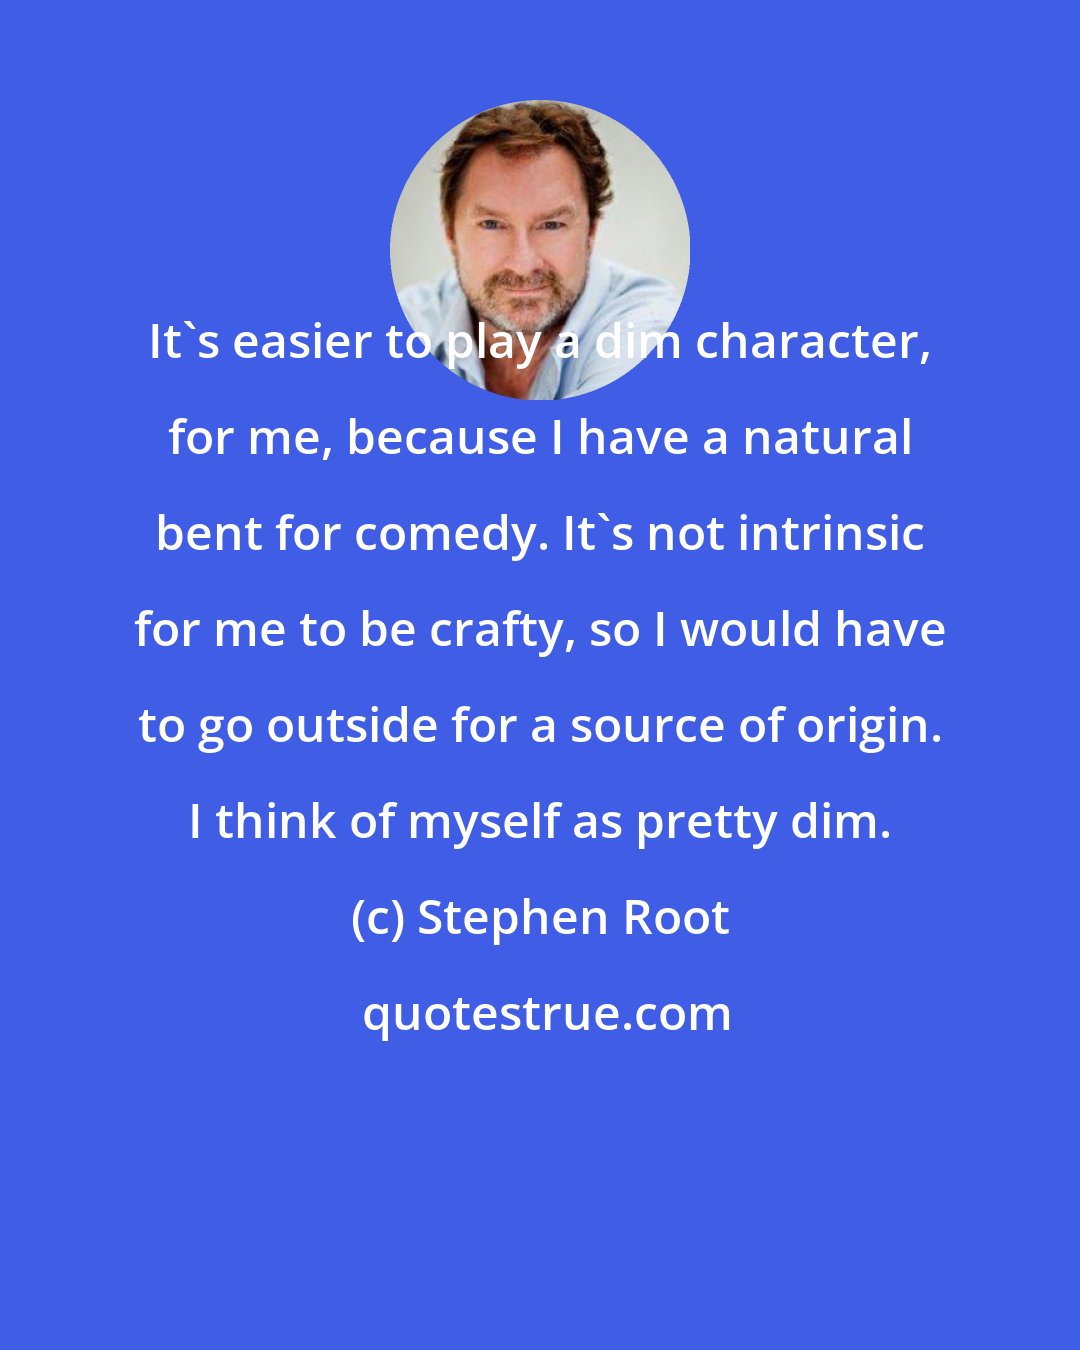 Stephen Root: It's easier to play a dim character, for me, because I have a natural bent for comedy. It's not intrinsic for me to be crafty, so I would have to go outside for a source of origin. I think of myself as pretty dim.